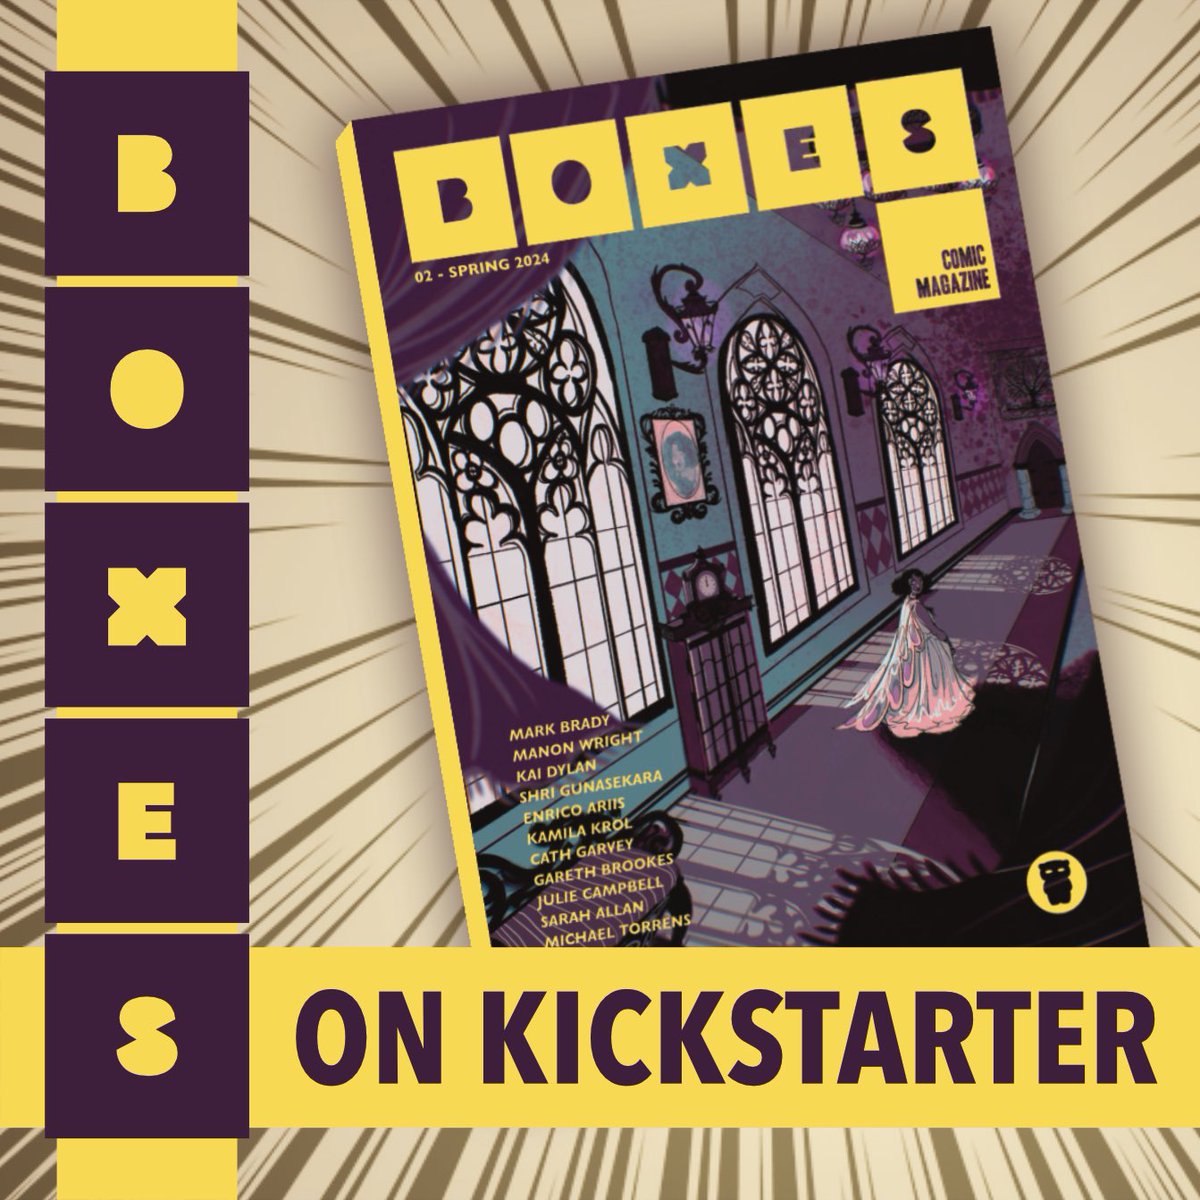 There’s just over a week left on the BOXES Vol. 2 campaign and we have about £2000 left to raise. Help us make this exciting comics anthology! kickstarter.com/projects/third… #comics #publishing #anthology